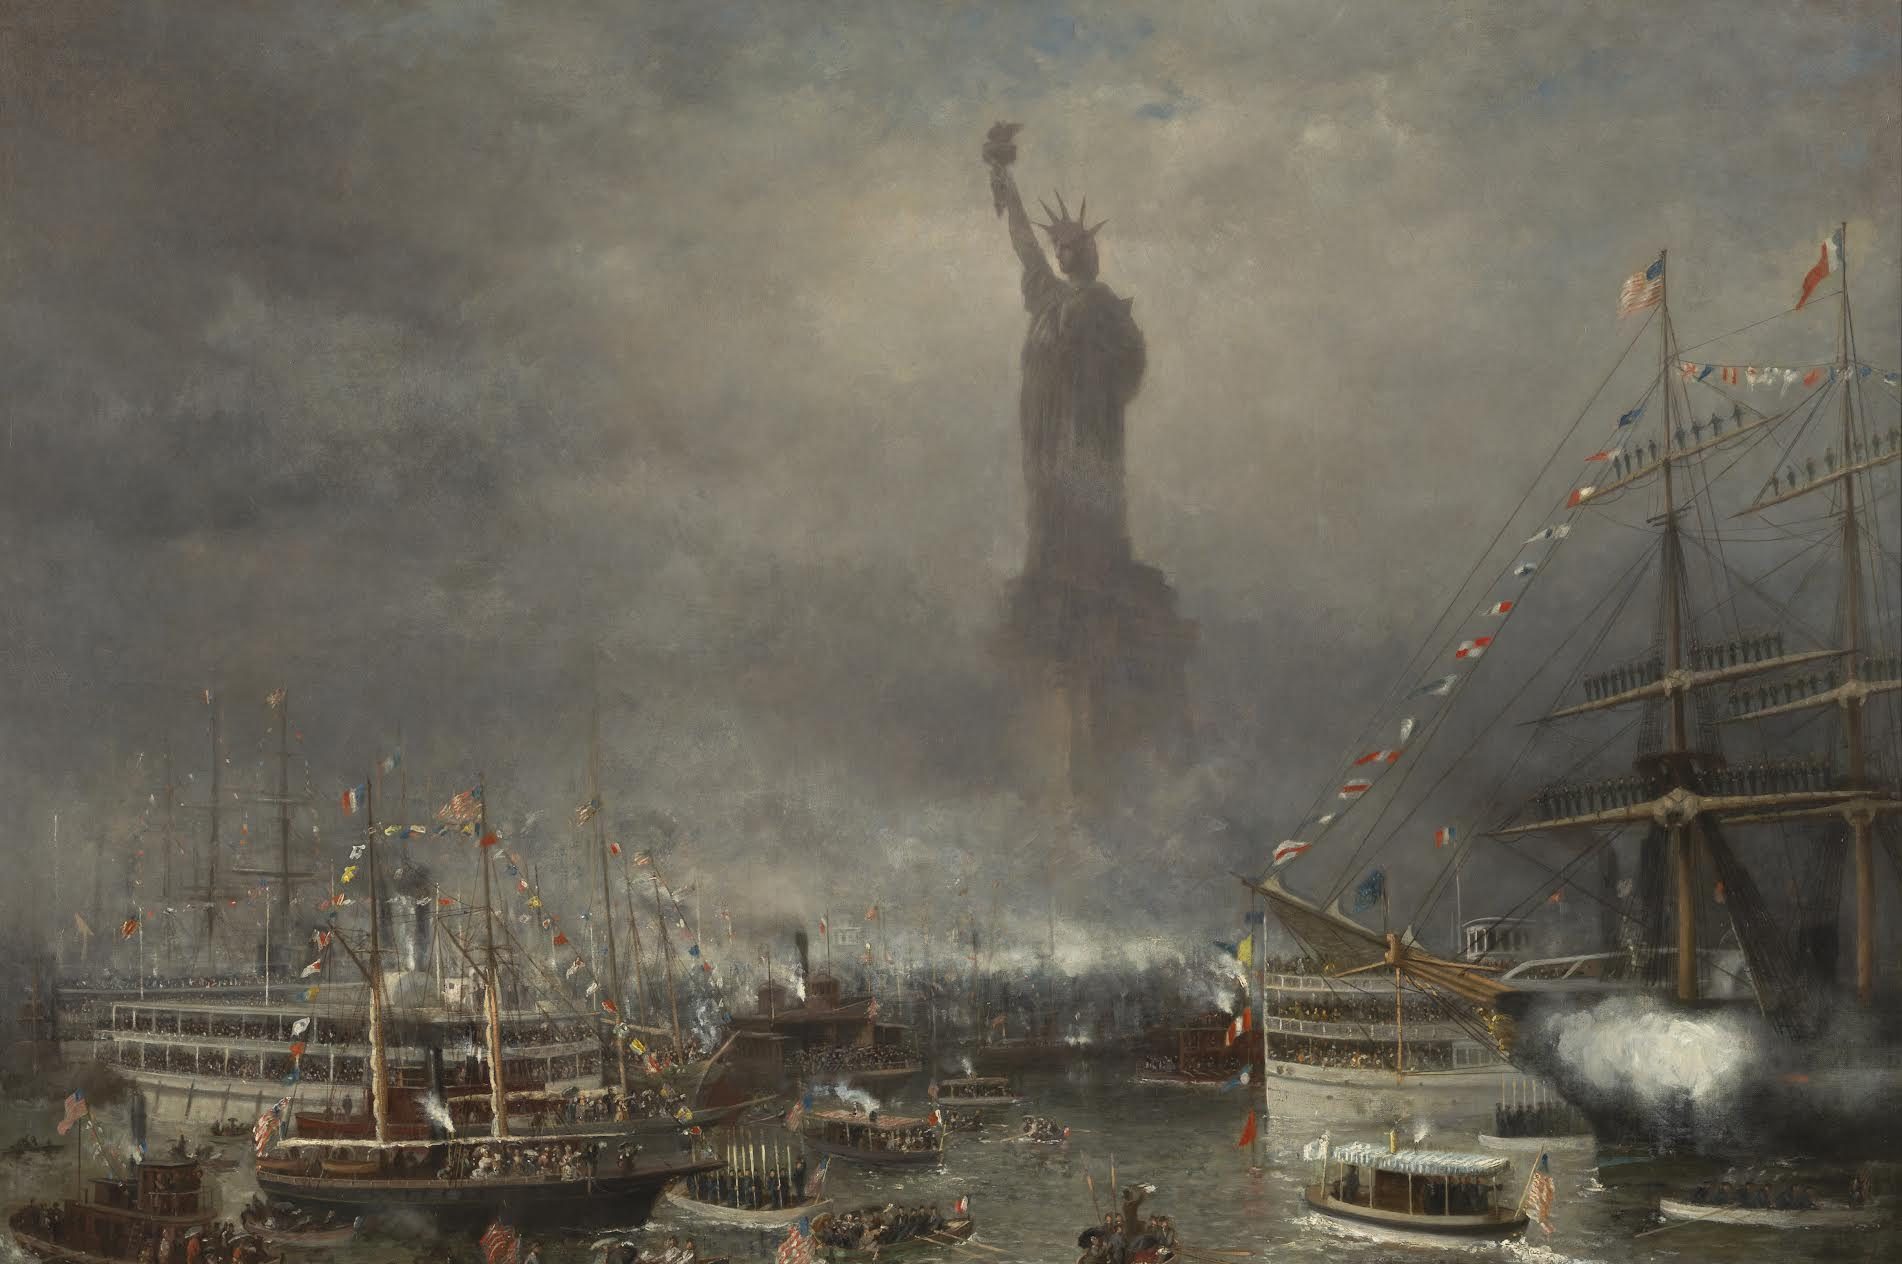 This magnificent image depicts numerous boats filled with onlookers watching as the Statue of Liberty is unveiled. The dramatic scale of the statue dwarfs the boats and the people as they fly their flags looking at the new addition to New York's river.